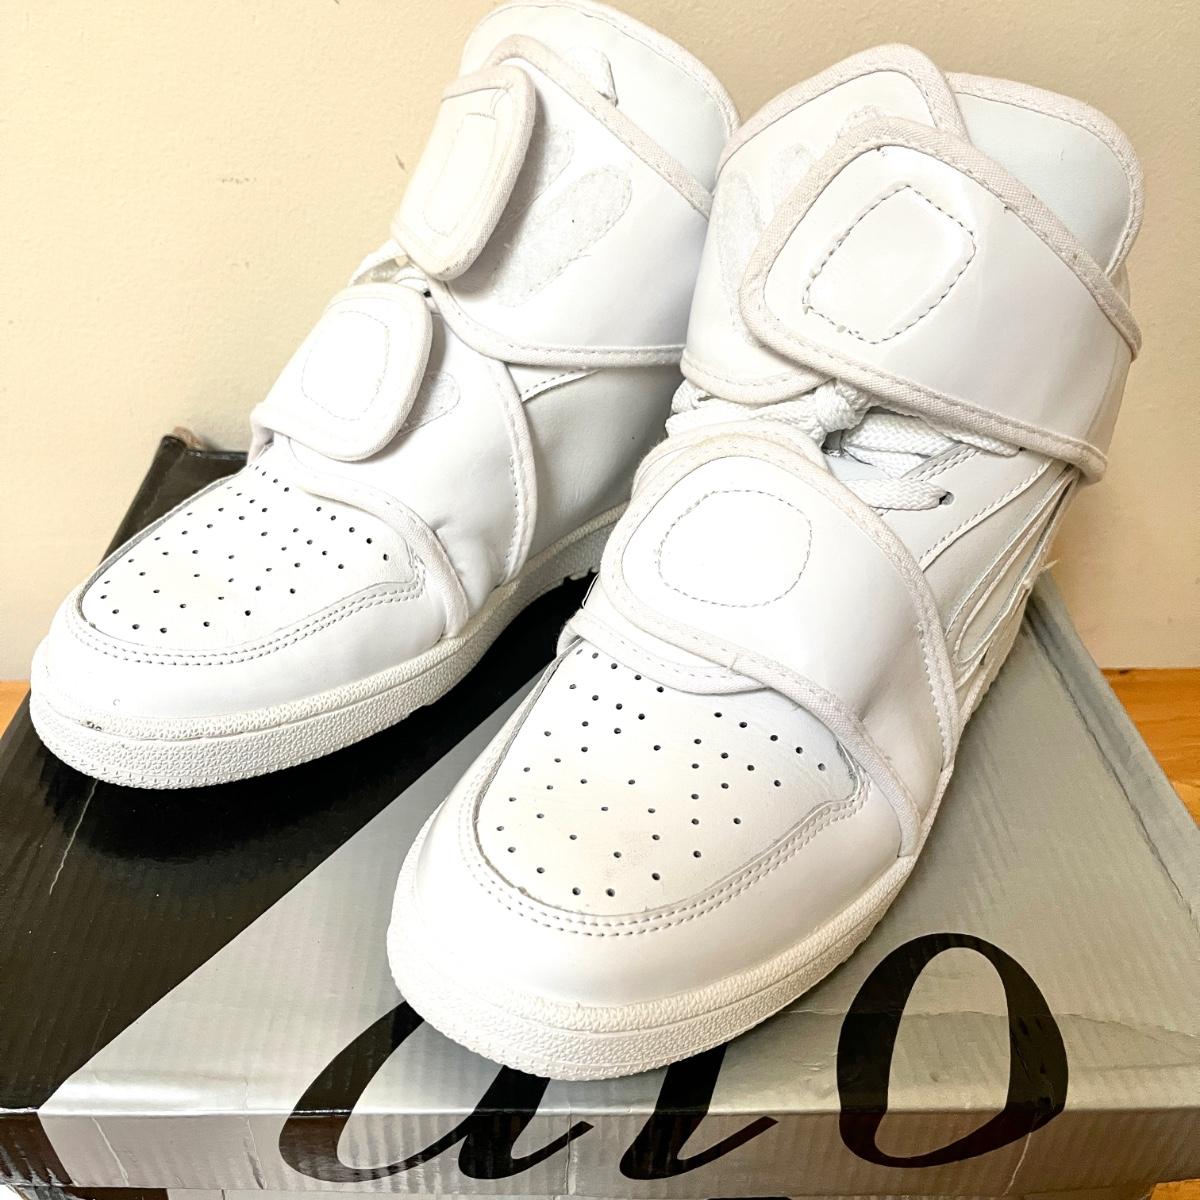 Lot 211 ATO Hi Vintage Hightop Mens Shoes Size 8 Gently Worn Sneakers ...